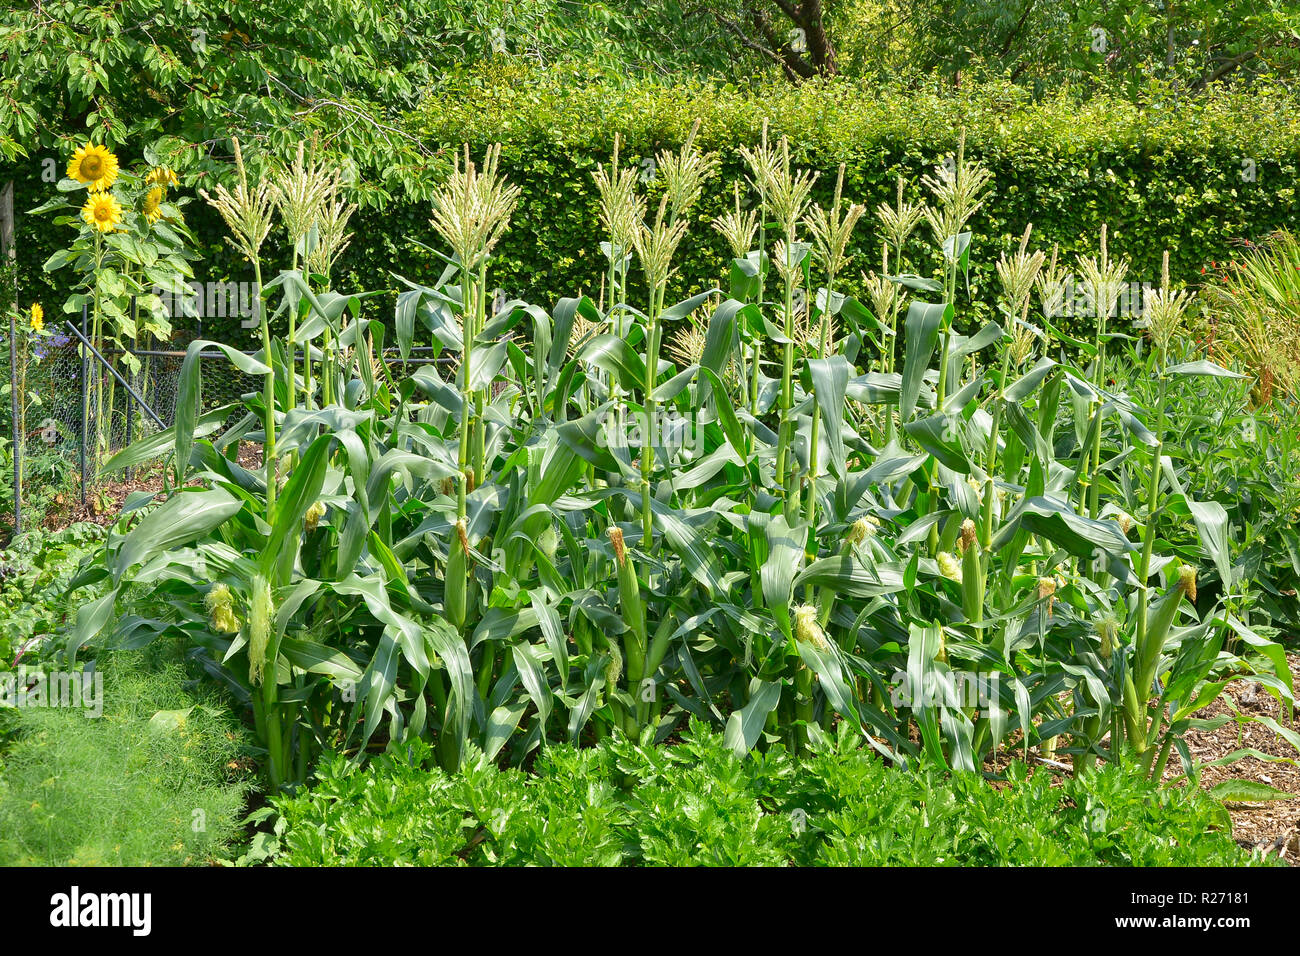 Maize or sweet corn growing in a vegetable garden Stock Photo